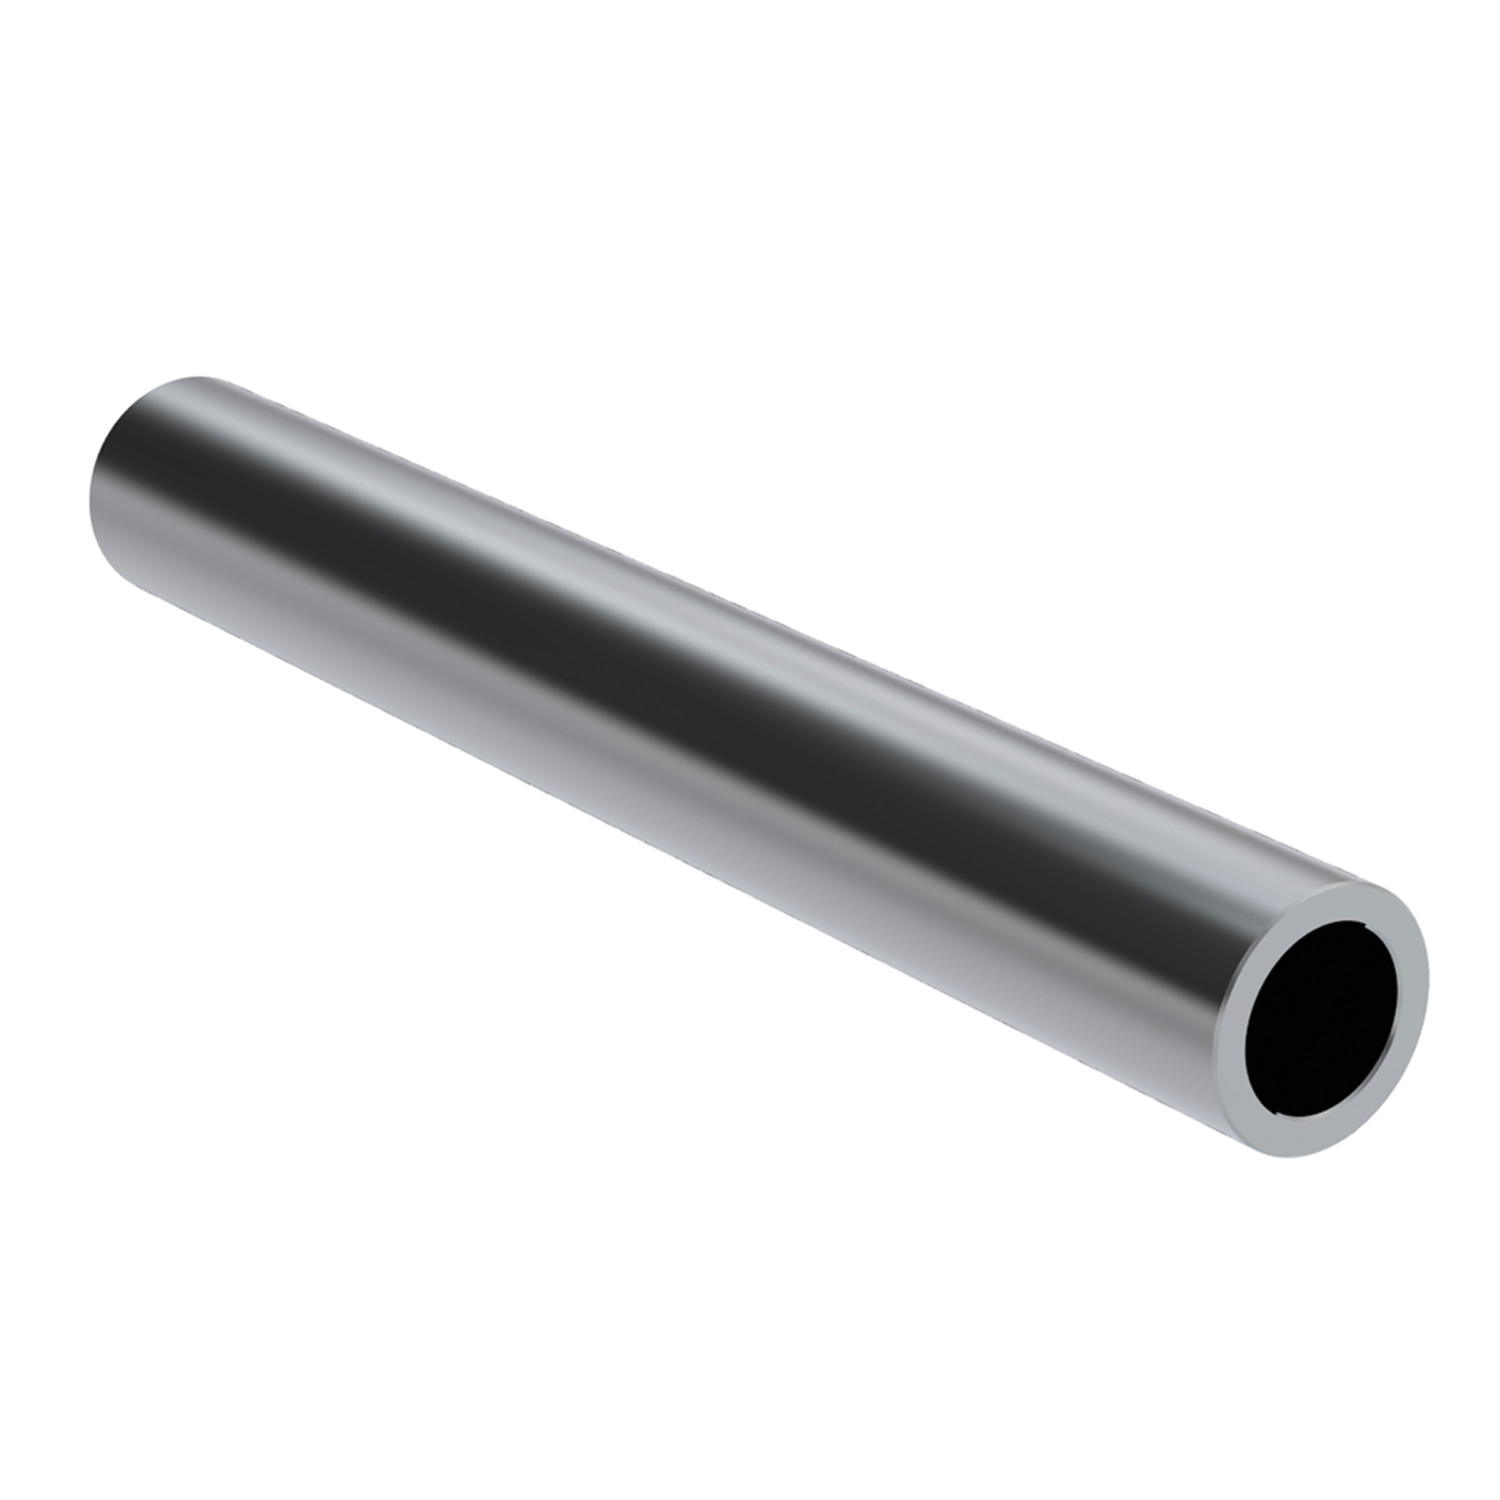 Hollow Steel Linear Shafts For use with linear bearings. Hollowed for lighter weight.